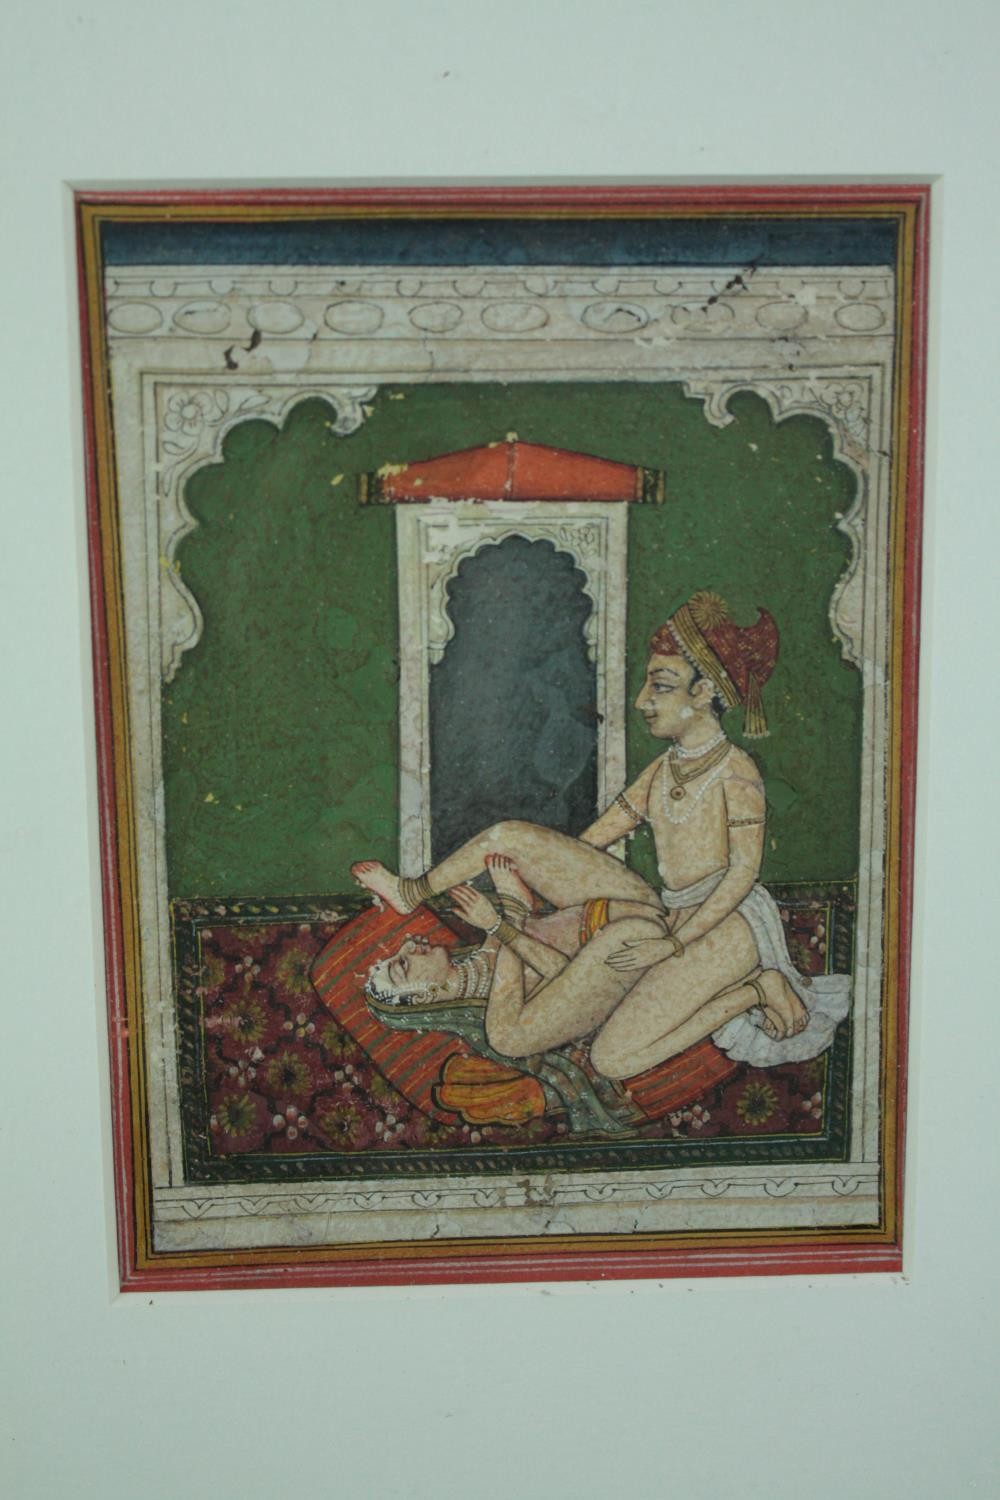 Two Indo-Persian gouache and pen works on paper. Probably nineteenth century. Framed. H.32 W.26 - Image 2 of 4